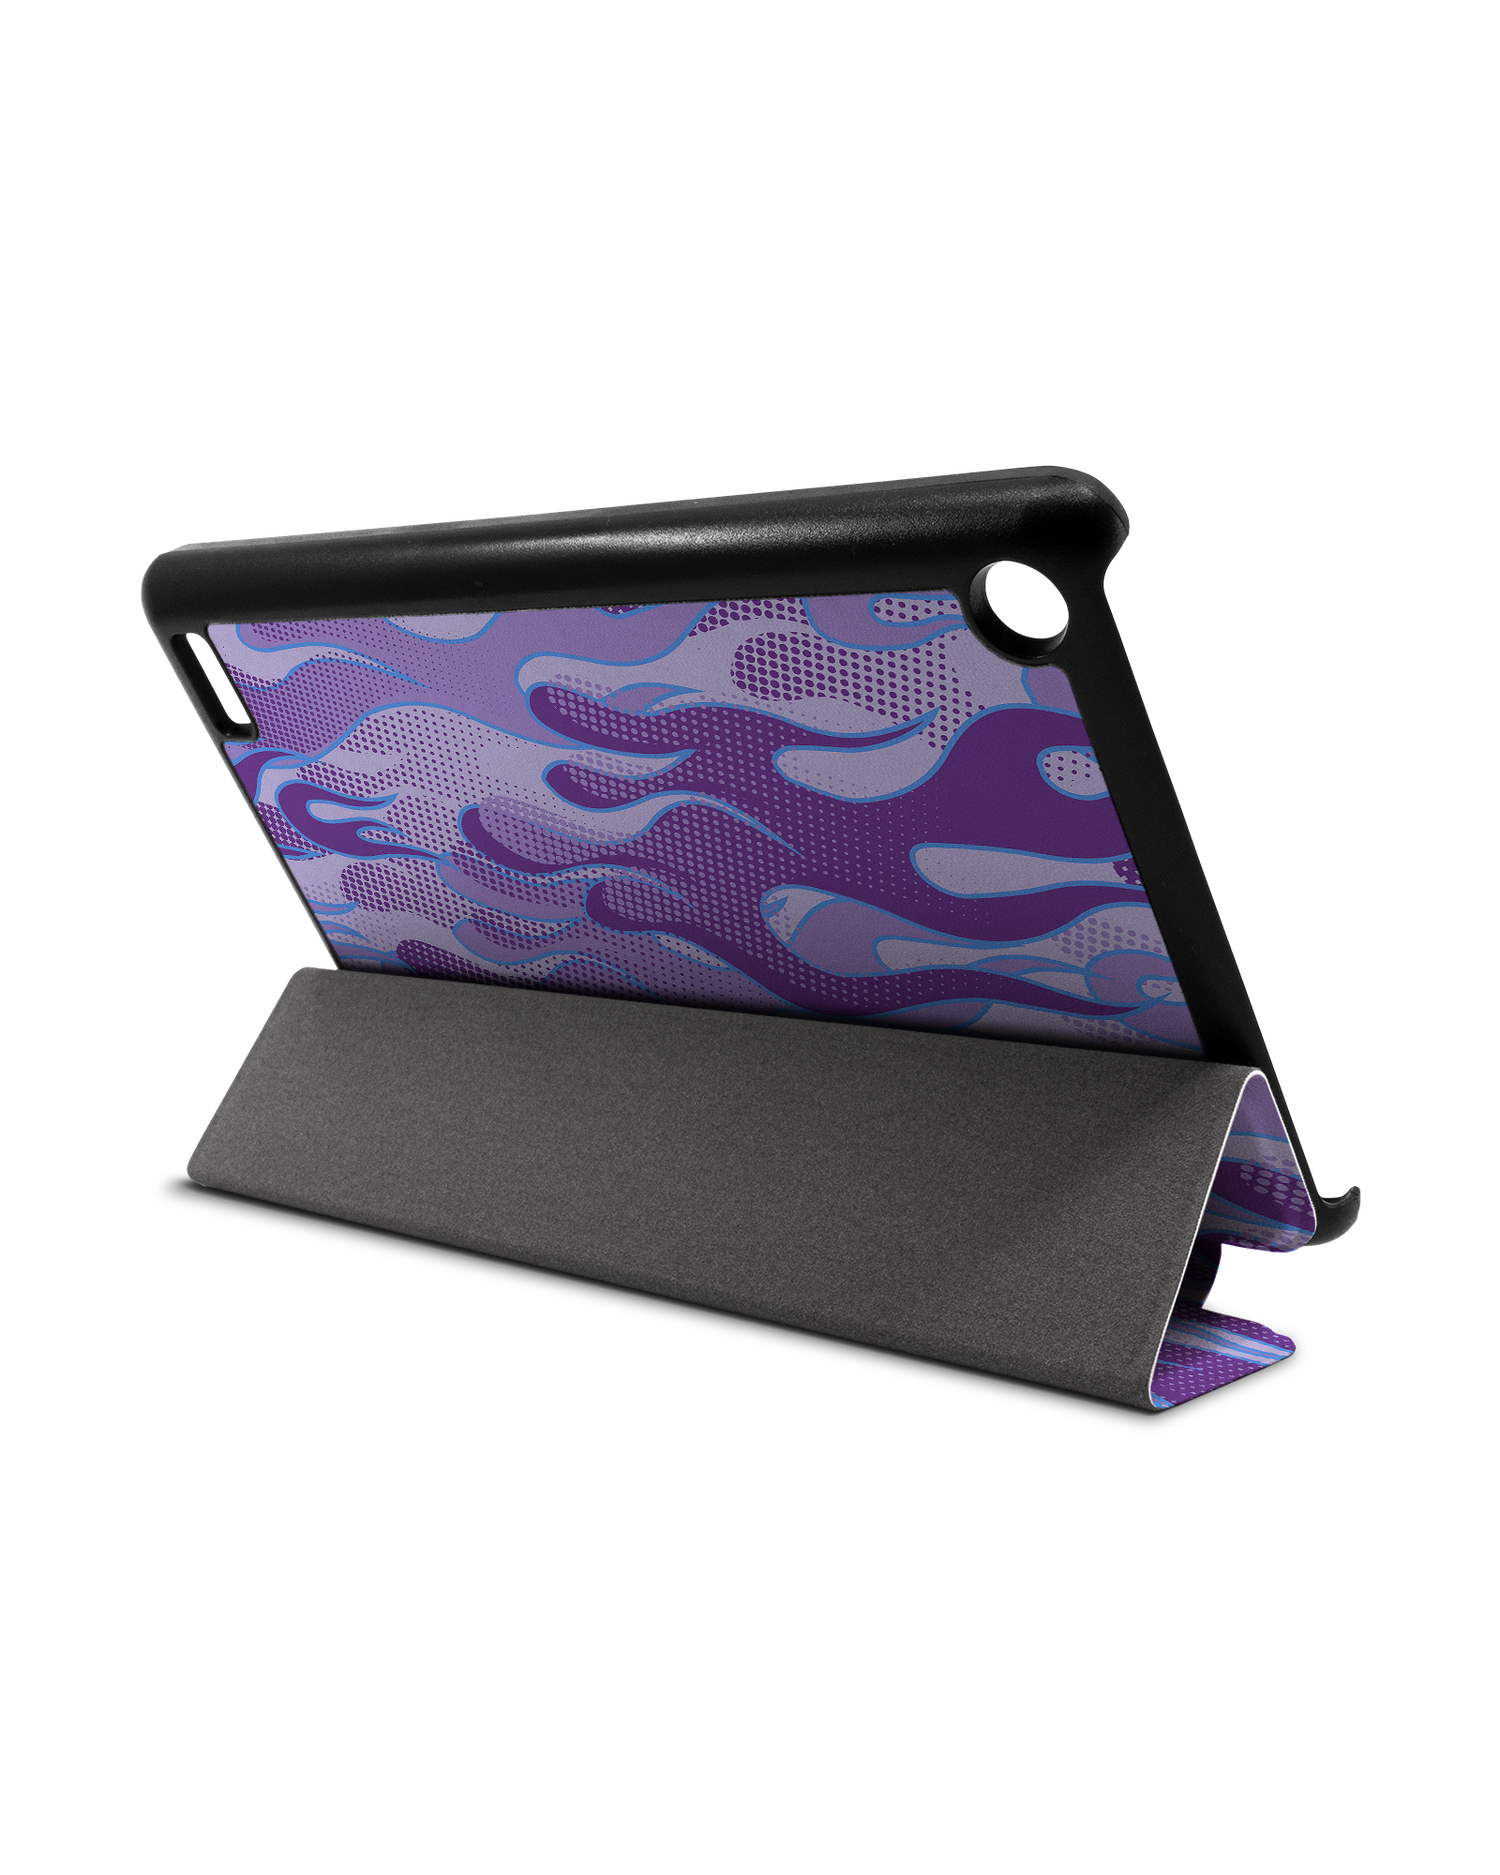 Purple Flames Tablet Smart Case for Amazon Fire 7: Used as Stand